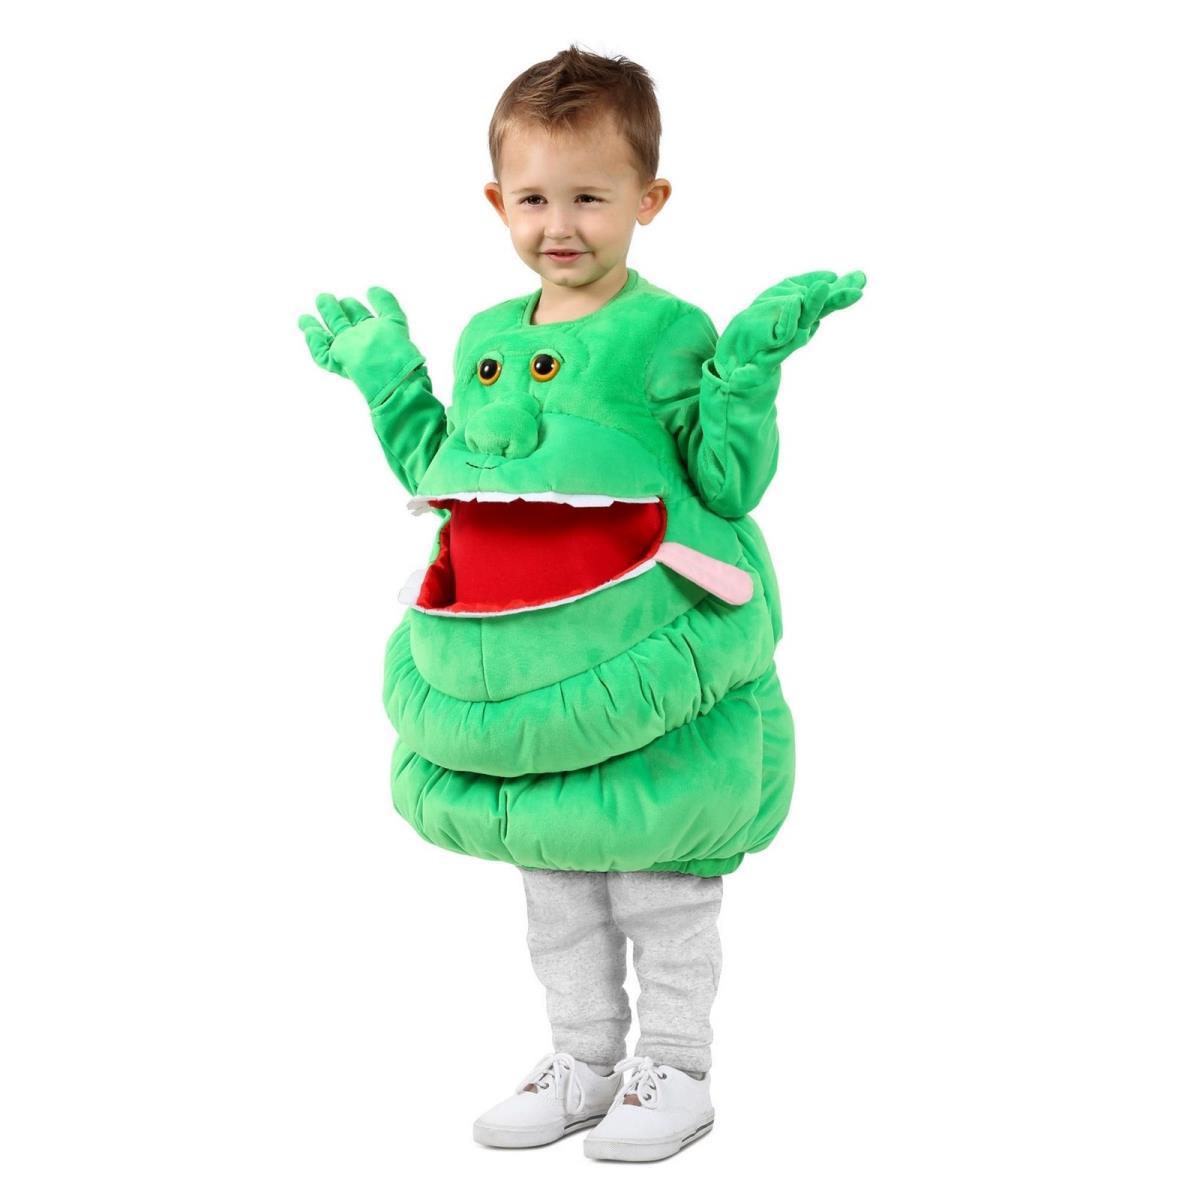 410372 Feed Me Ghostbusters Slimer Child Costume - Extra Small & Small